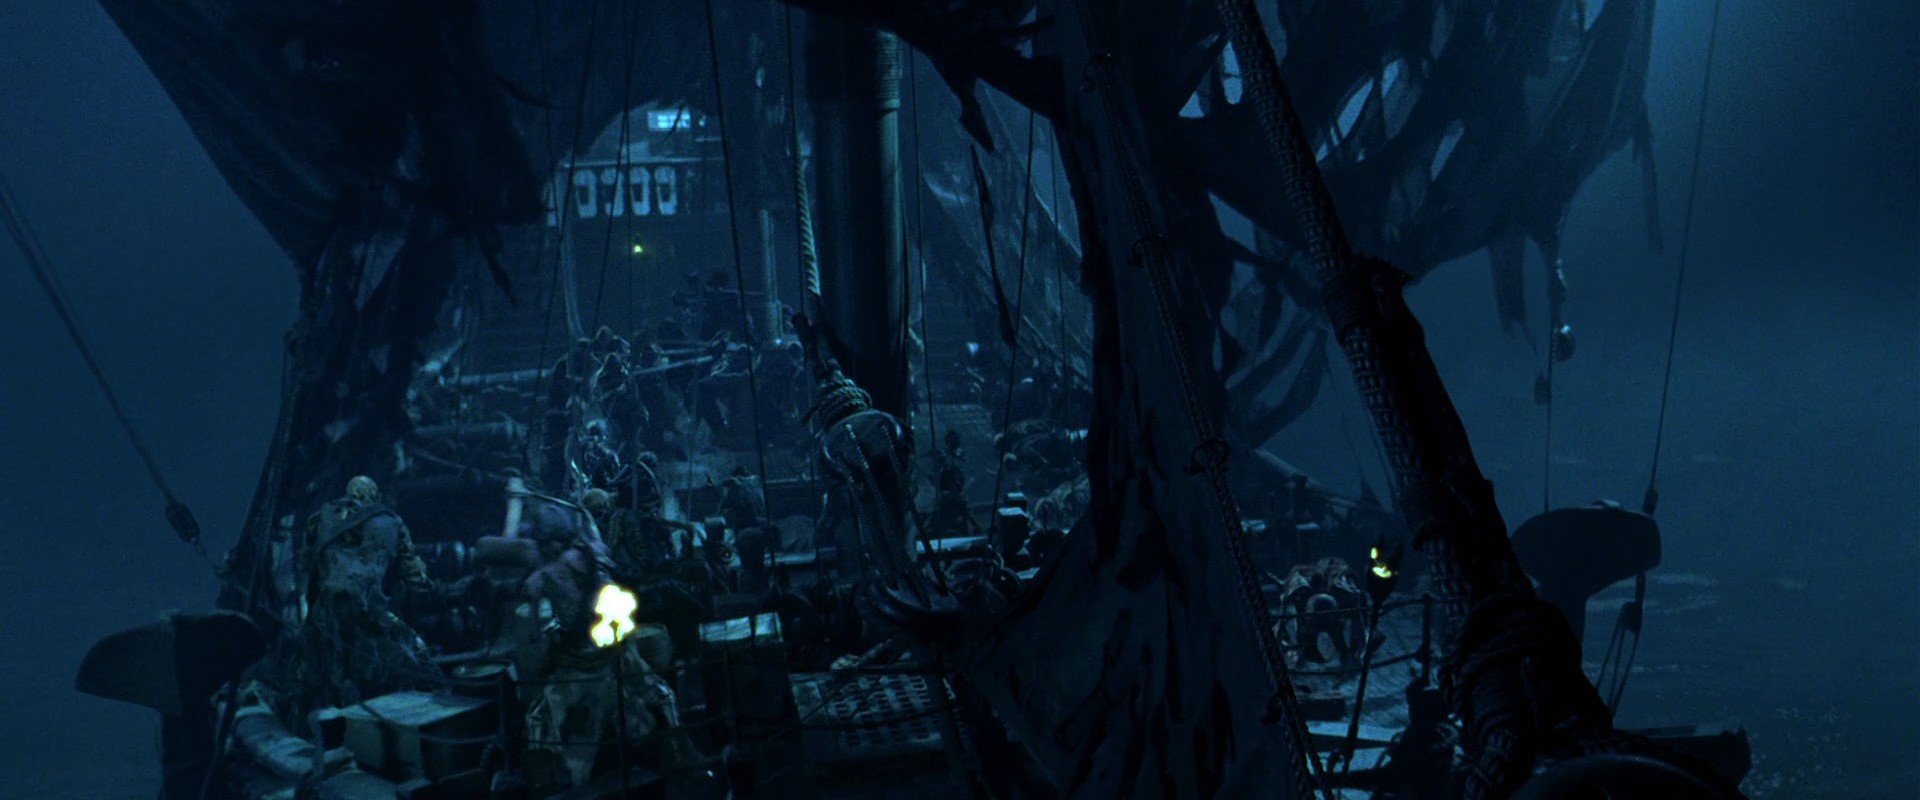 Pictures Photos From Pirates Of The Caribbean The Curse Of The | Short ...